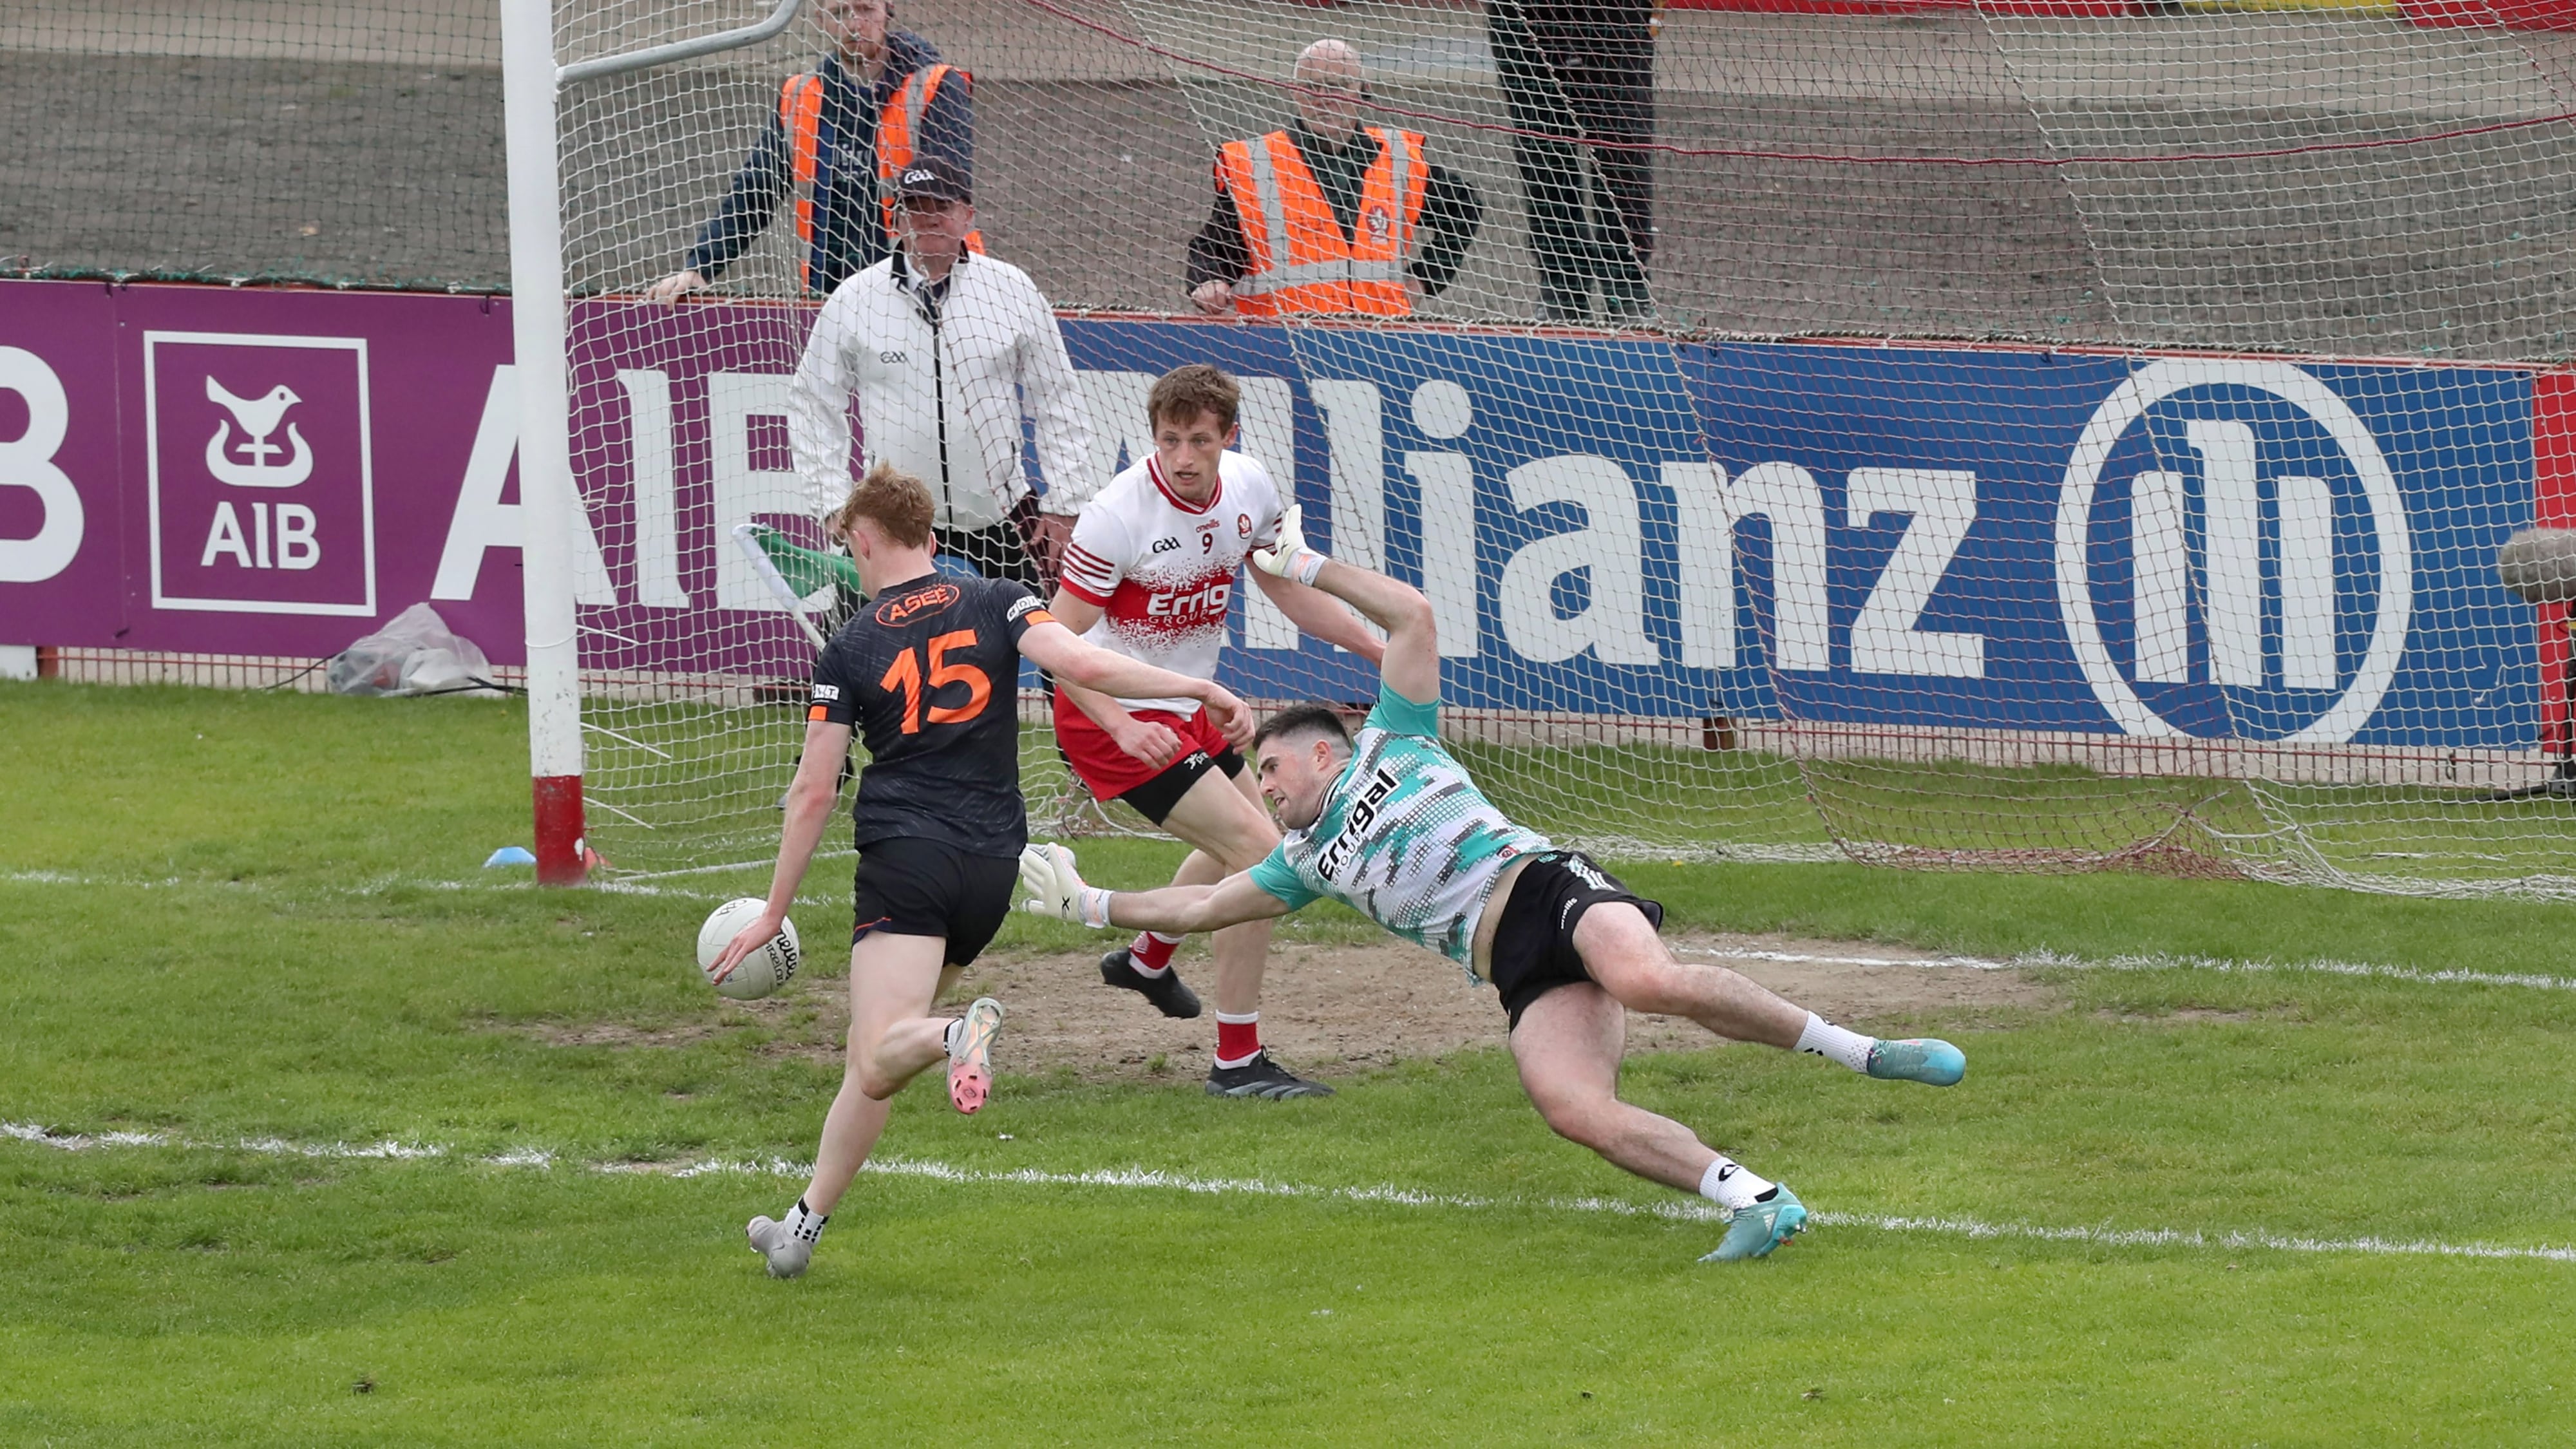 Conor Turbitt rolls home Armagh's second goal despite the best efforts of Odhran Lynch and Brendan Rogers. Picture: Margaret McLaughlin